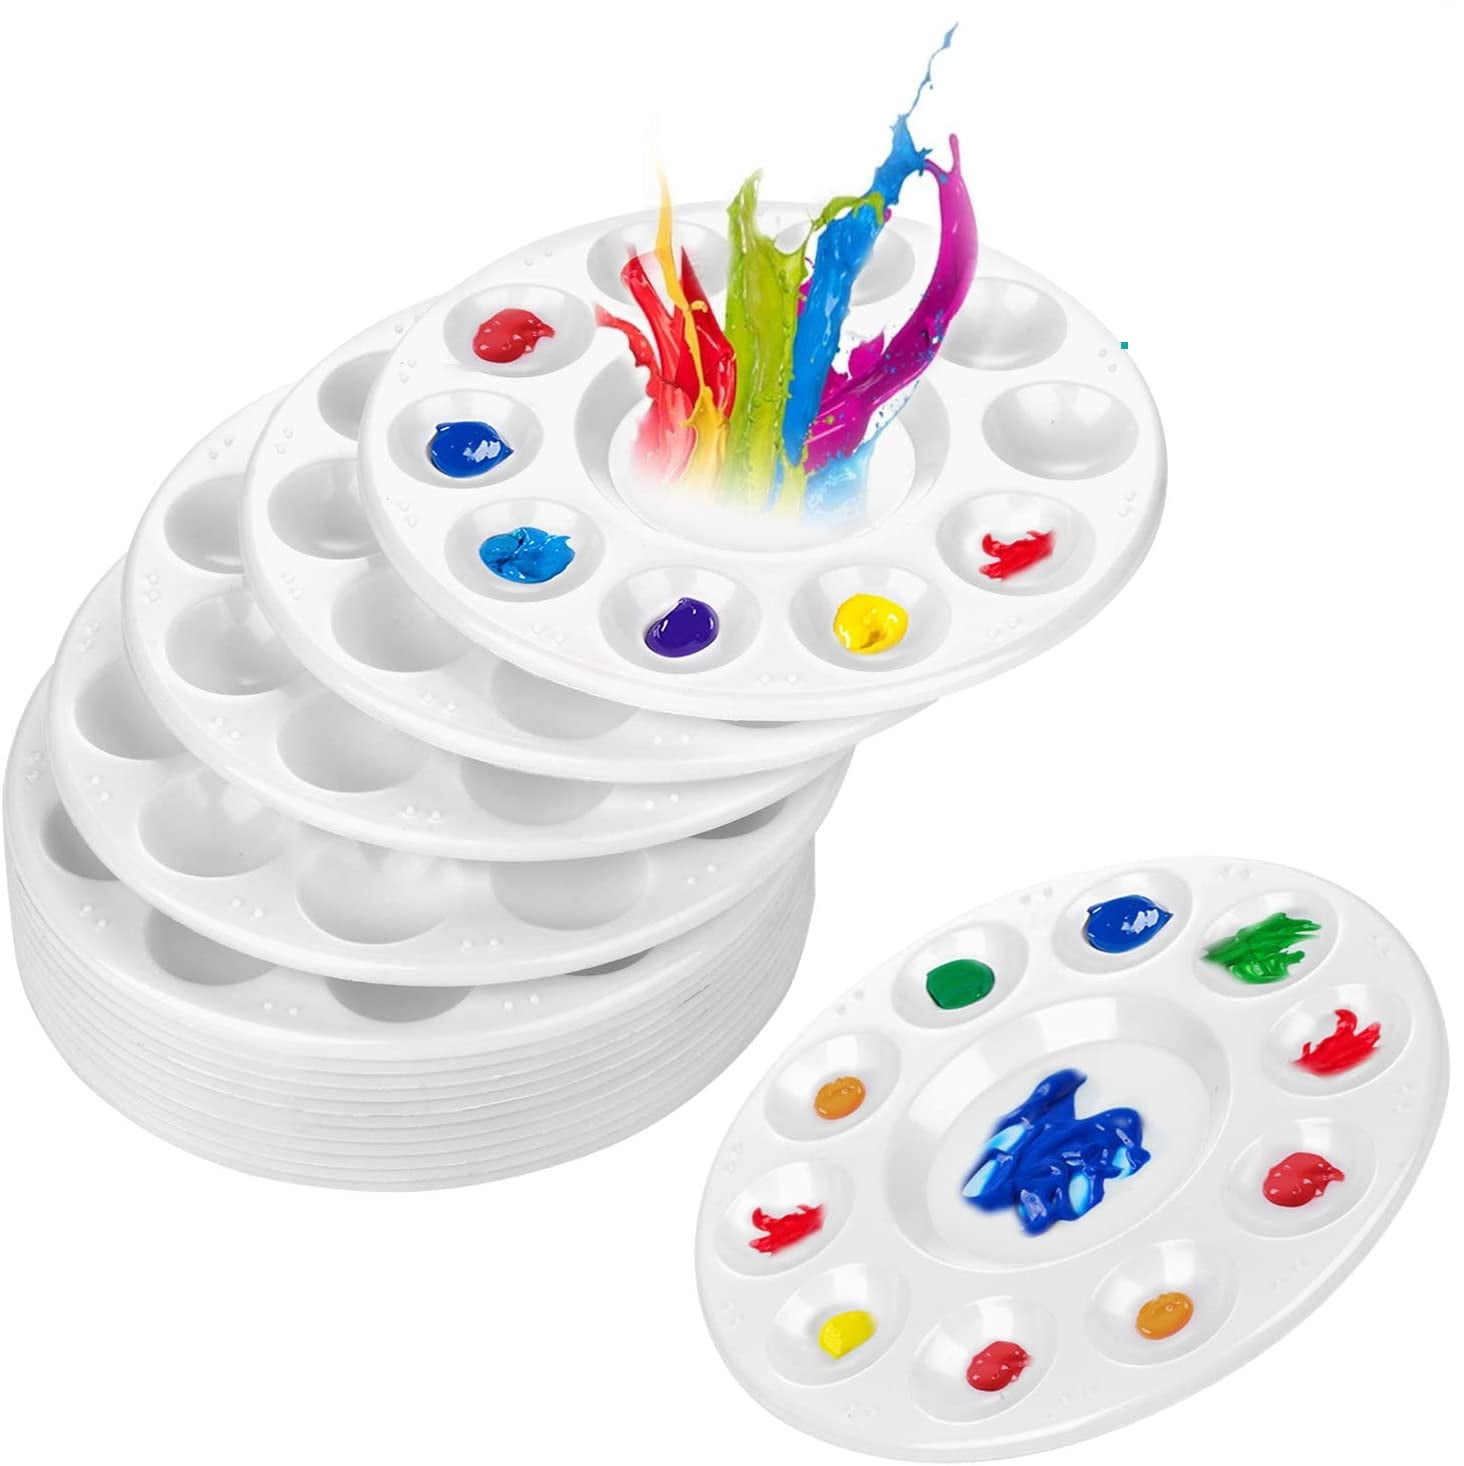 Gaoominy 28 Pcs Paint Tray Palettes Plastic for Art Painting and Kids Decorating Cupcakes 